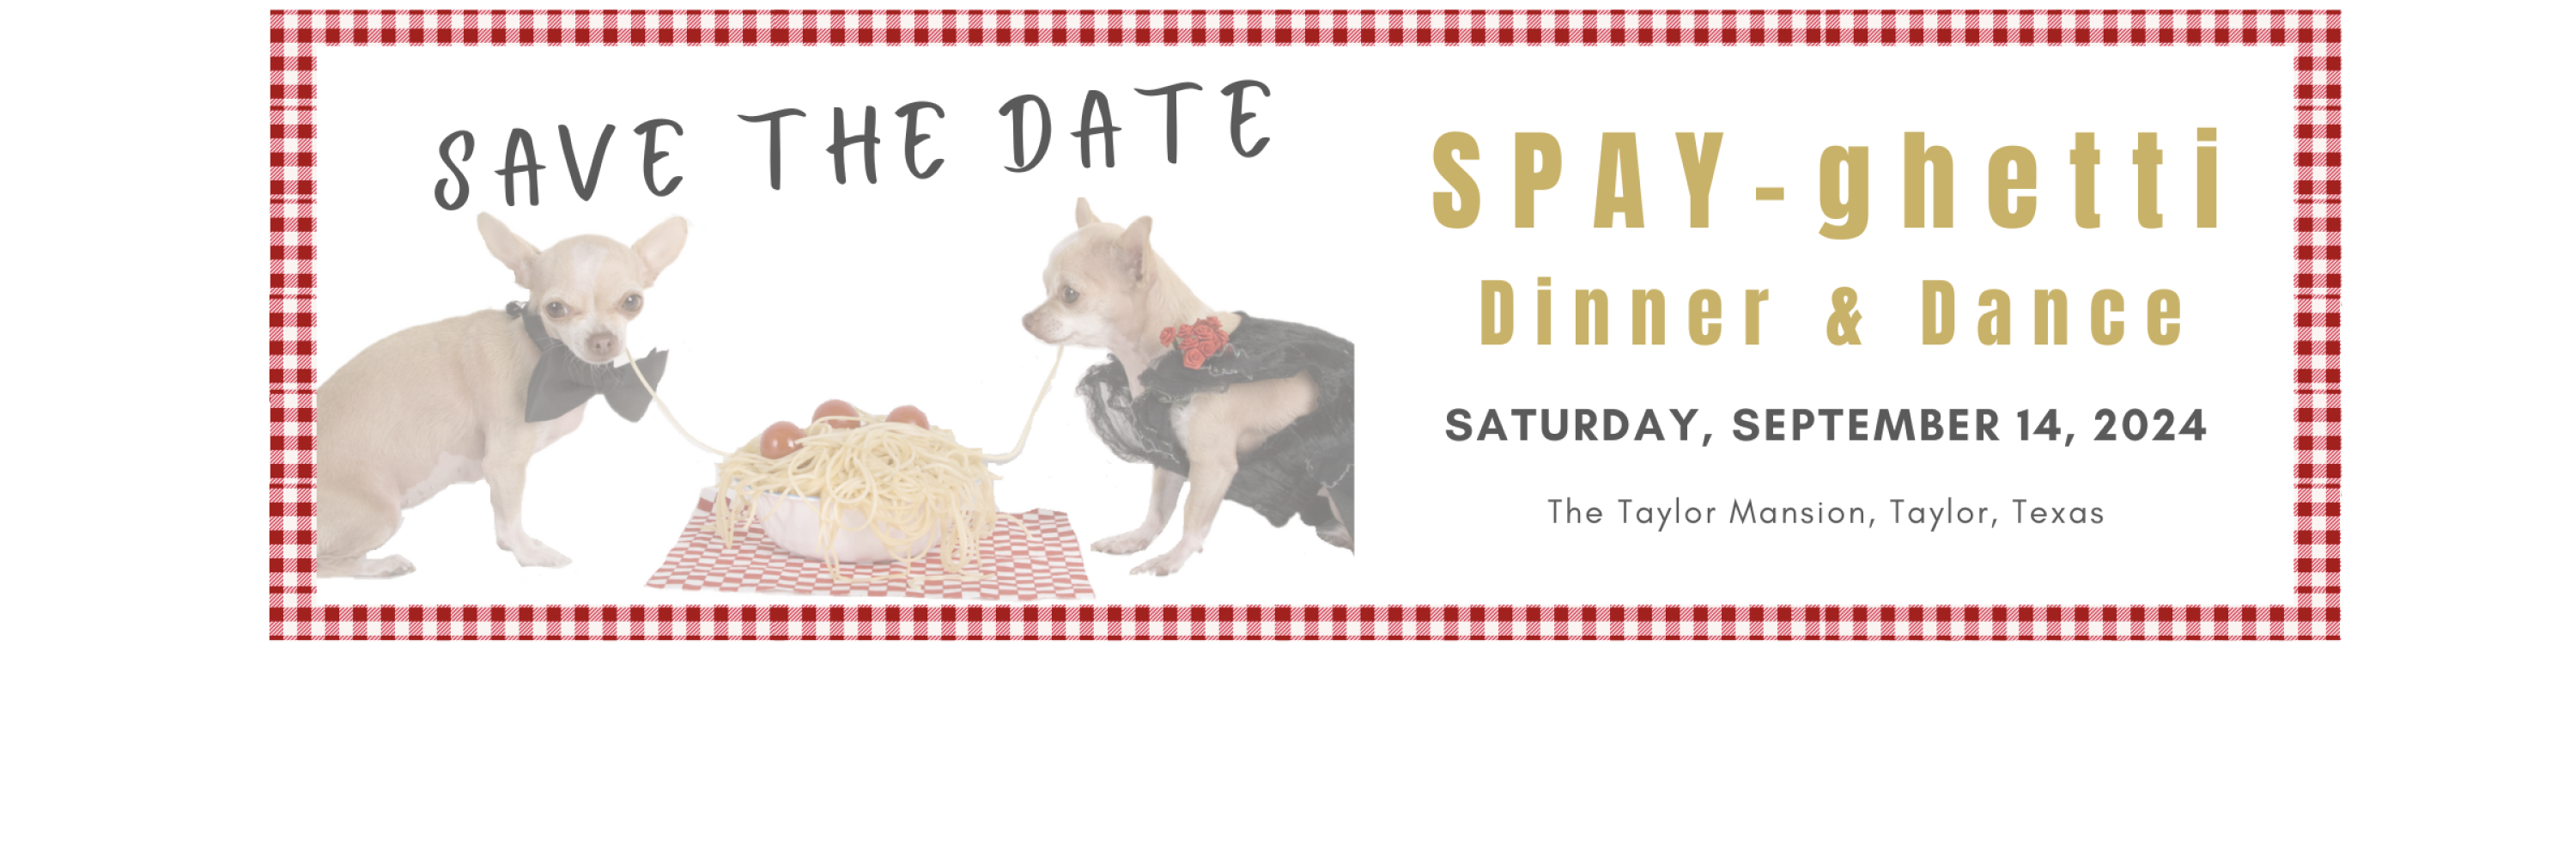 SPAY-ghetti Save the Date 2024